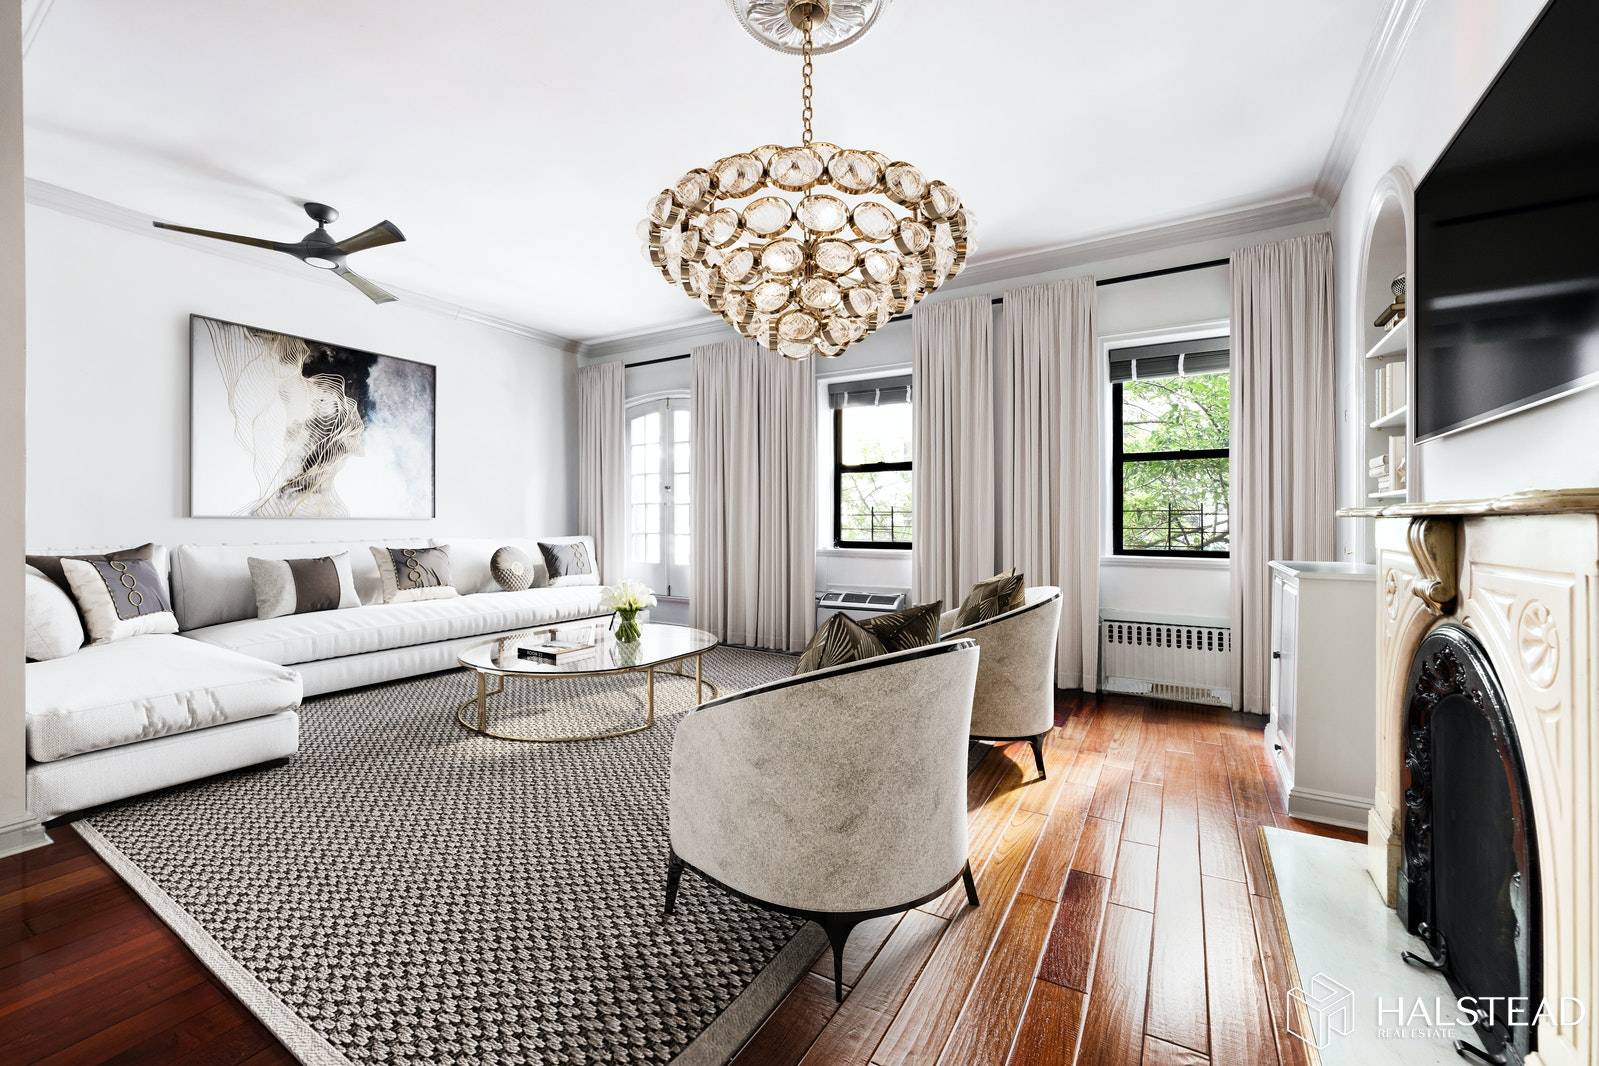 A stunning combination of 2 apartments, Residence 4 is a rare jewel in a well maintained brownstone in the heart of Gramercy Park.